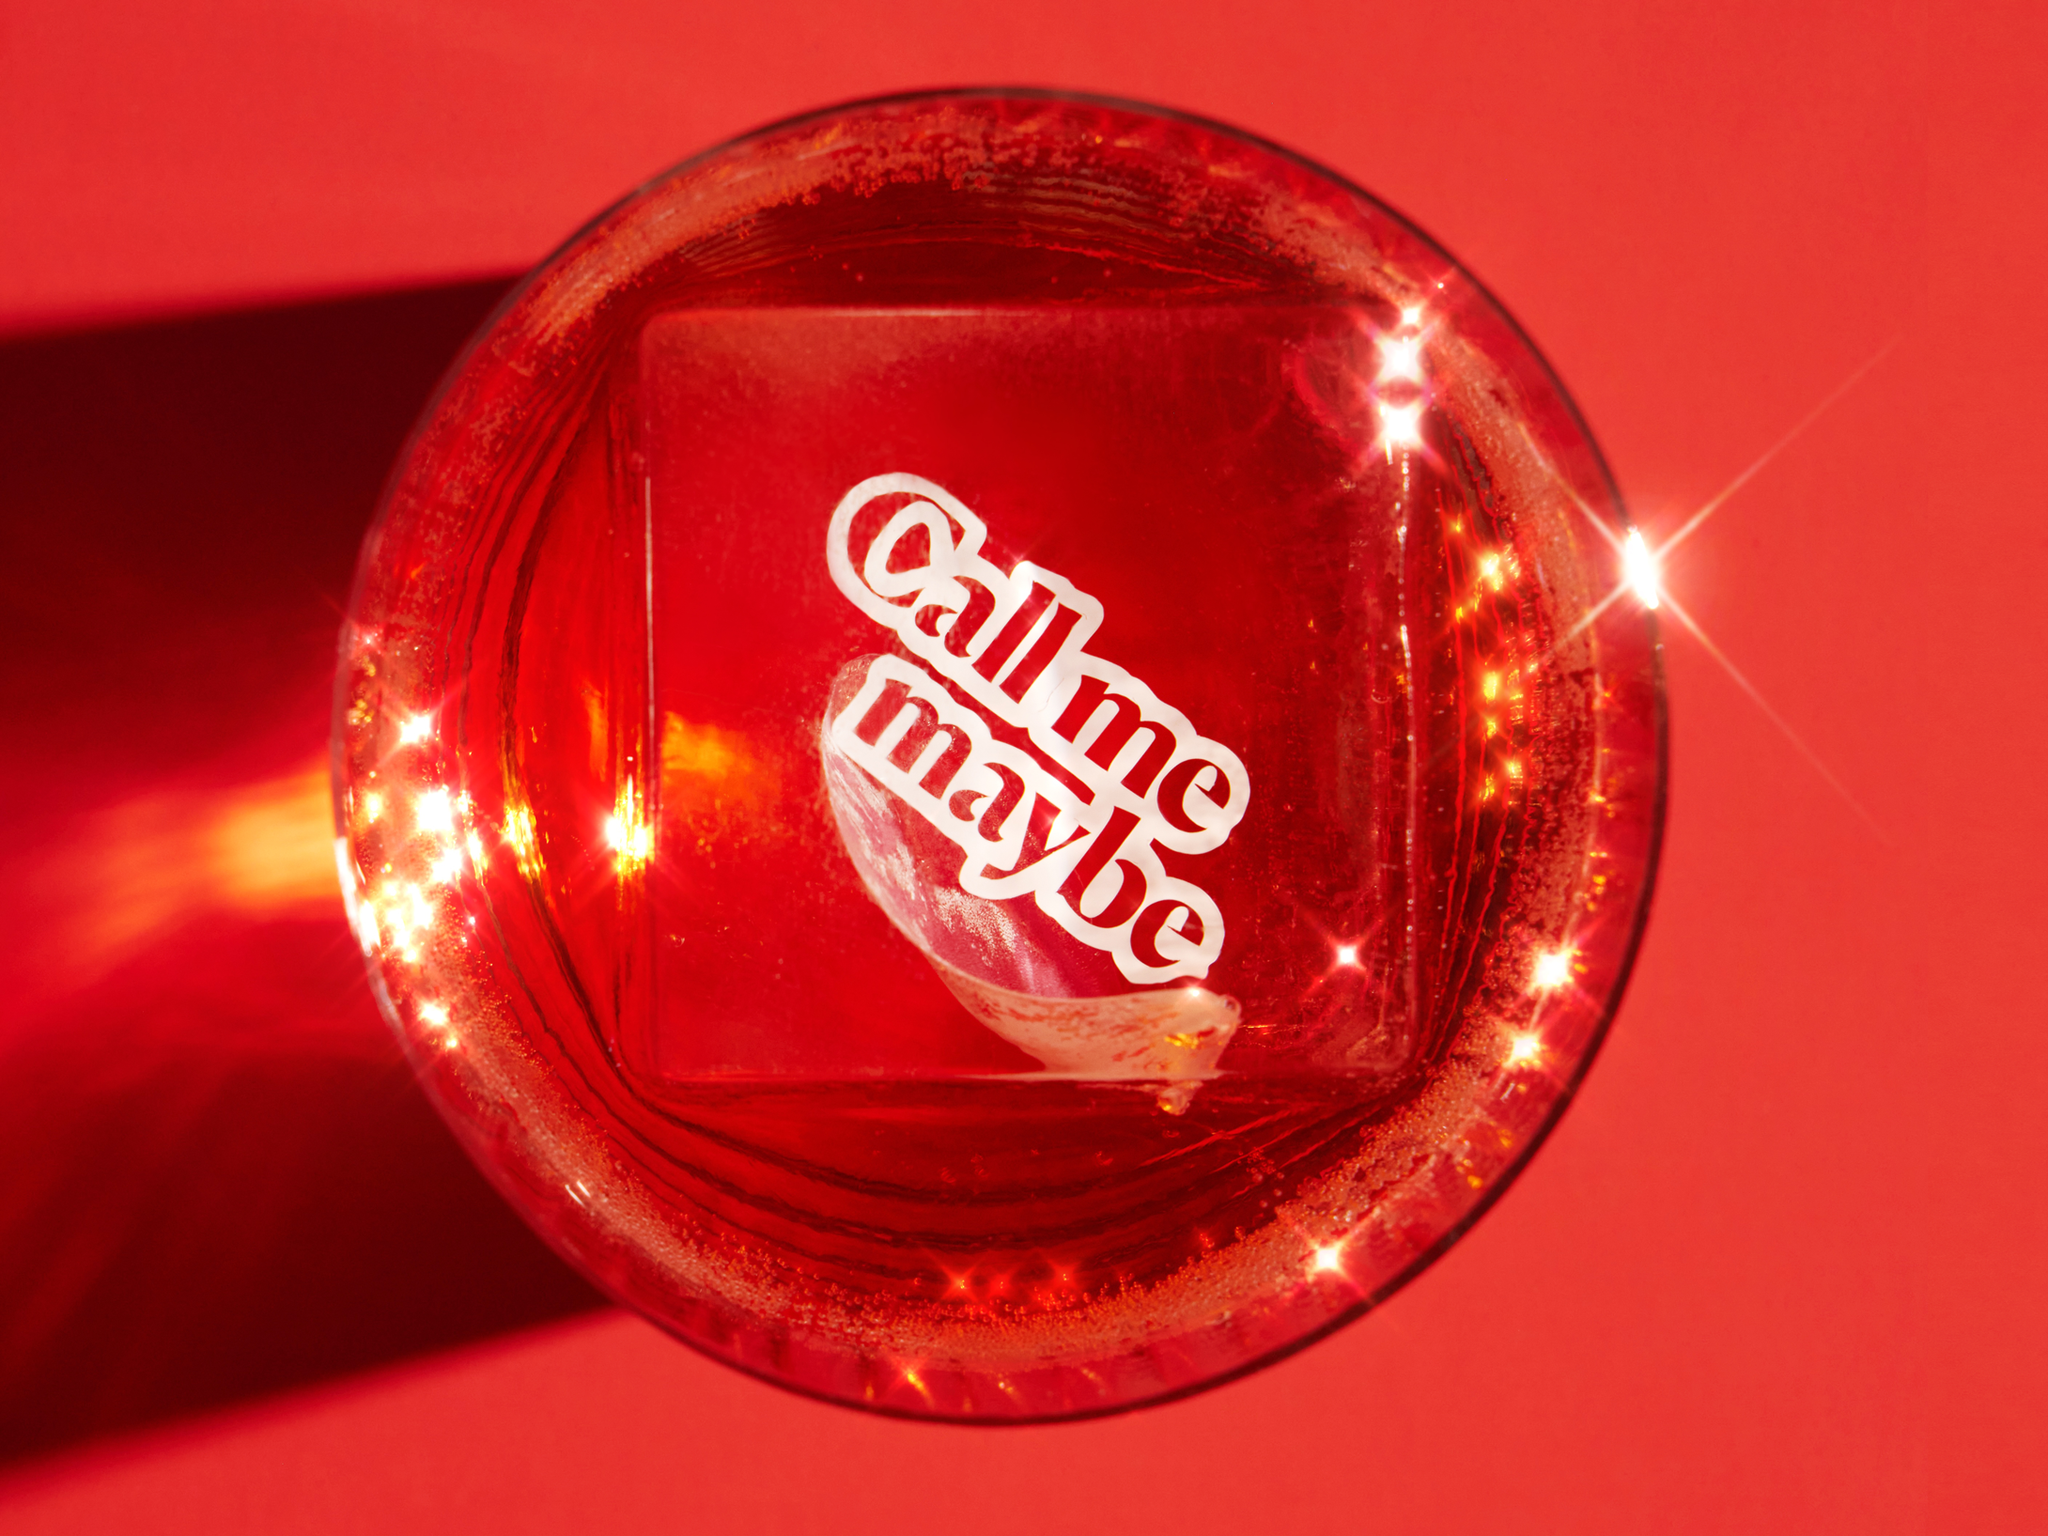 ice cube with the words "call me maybe" in a cocktail glass, shot from above on a red background